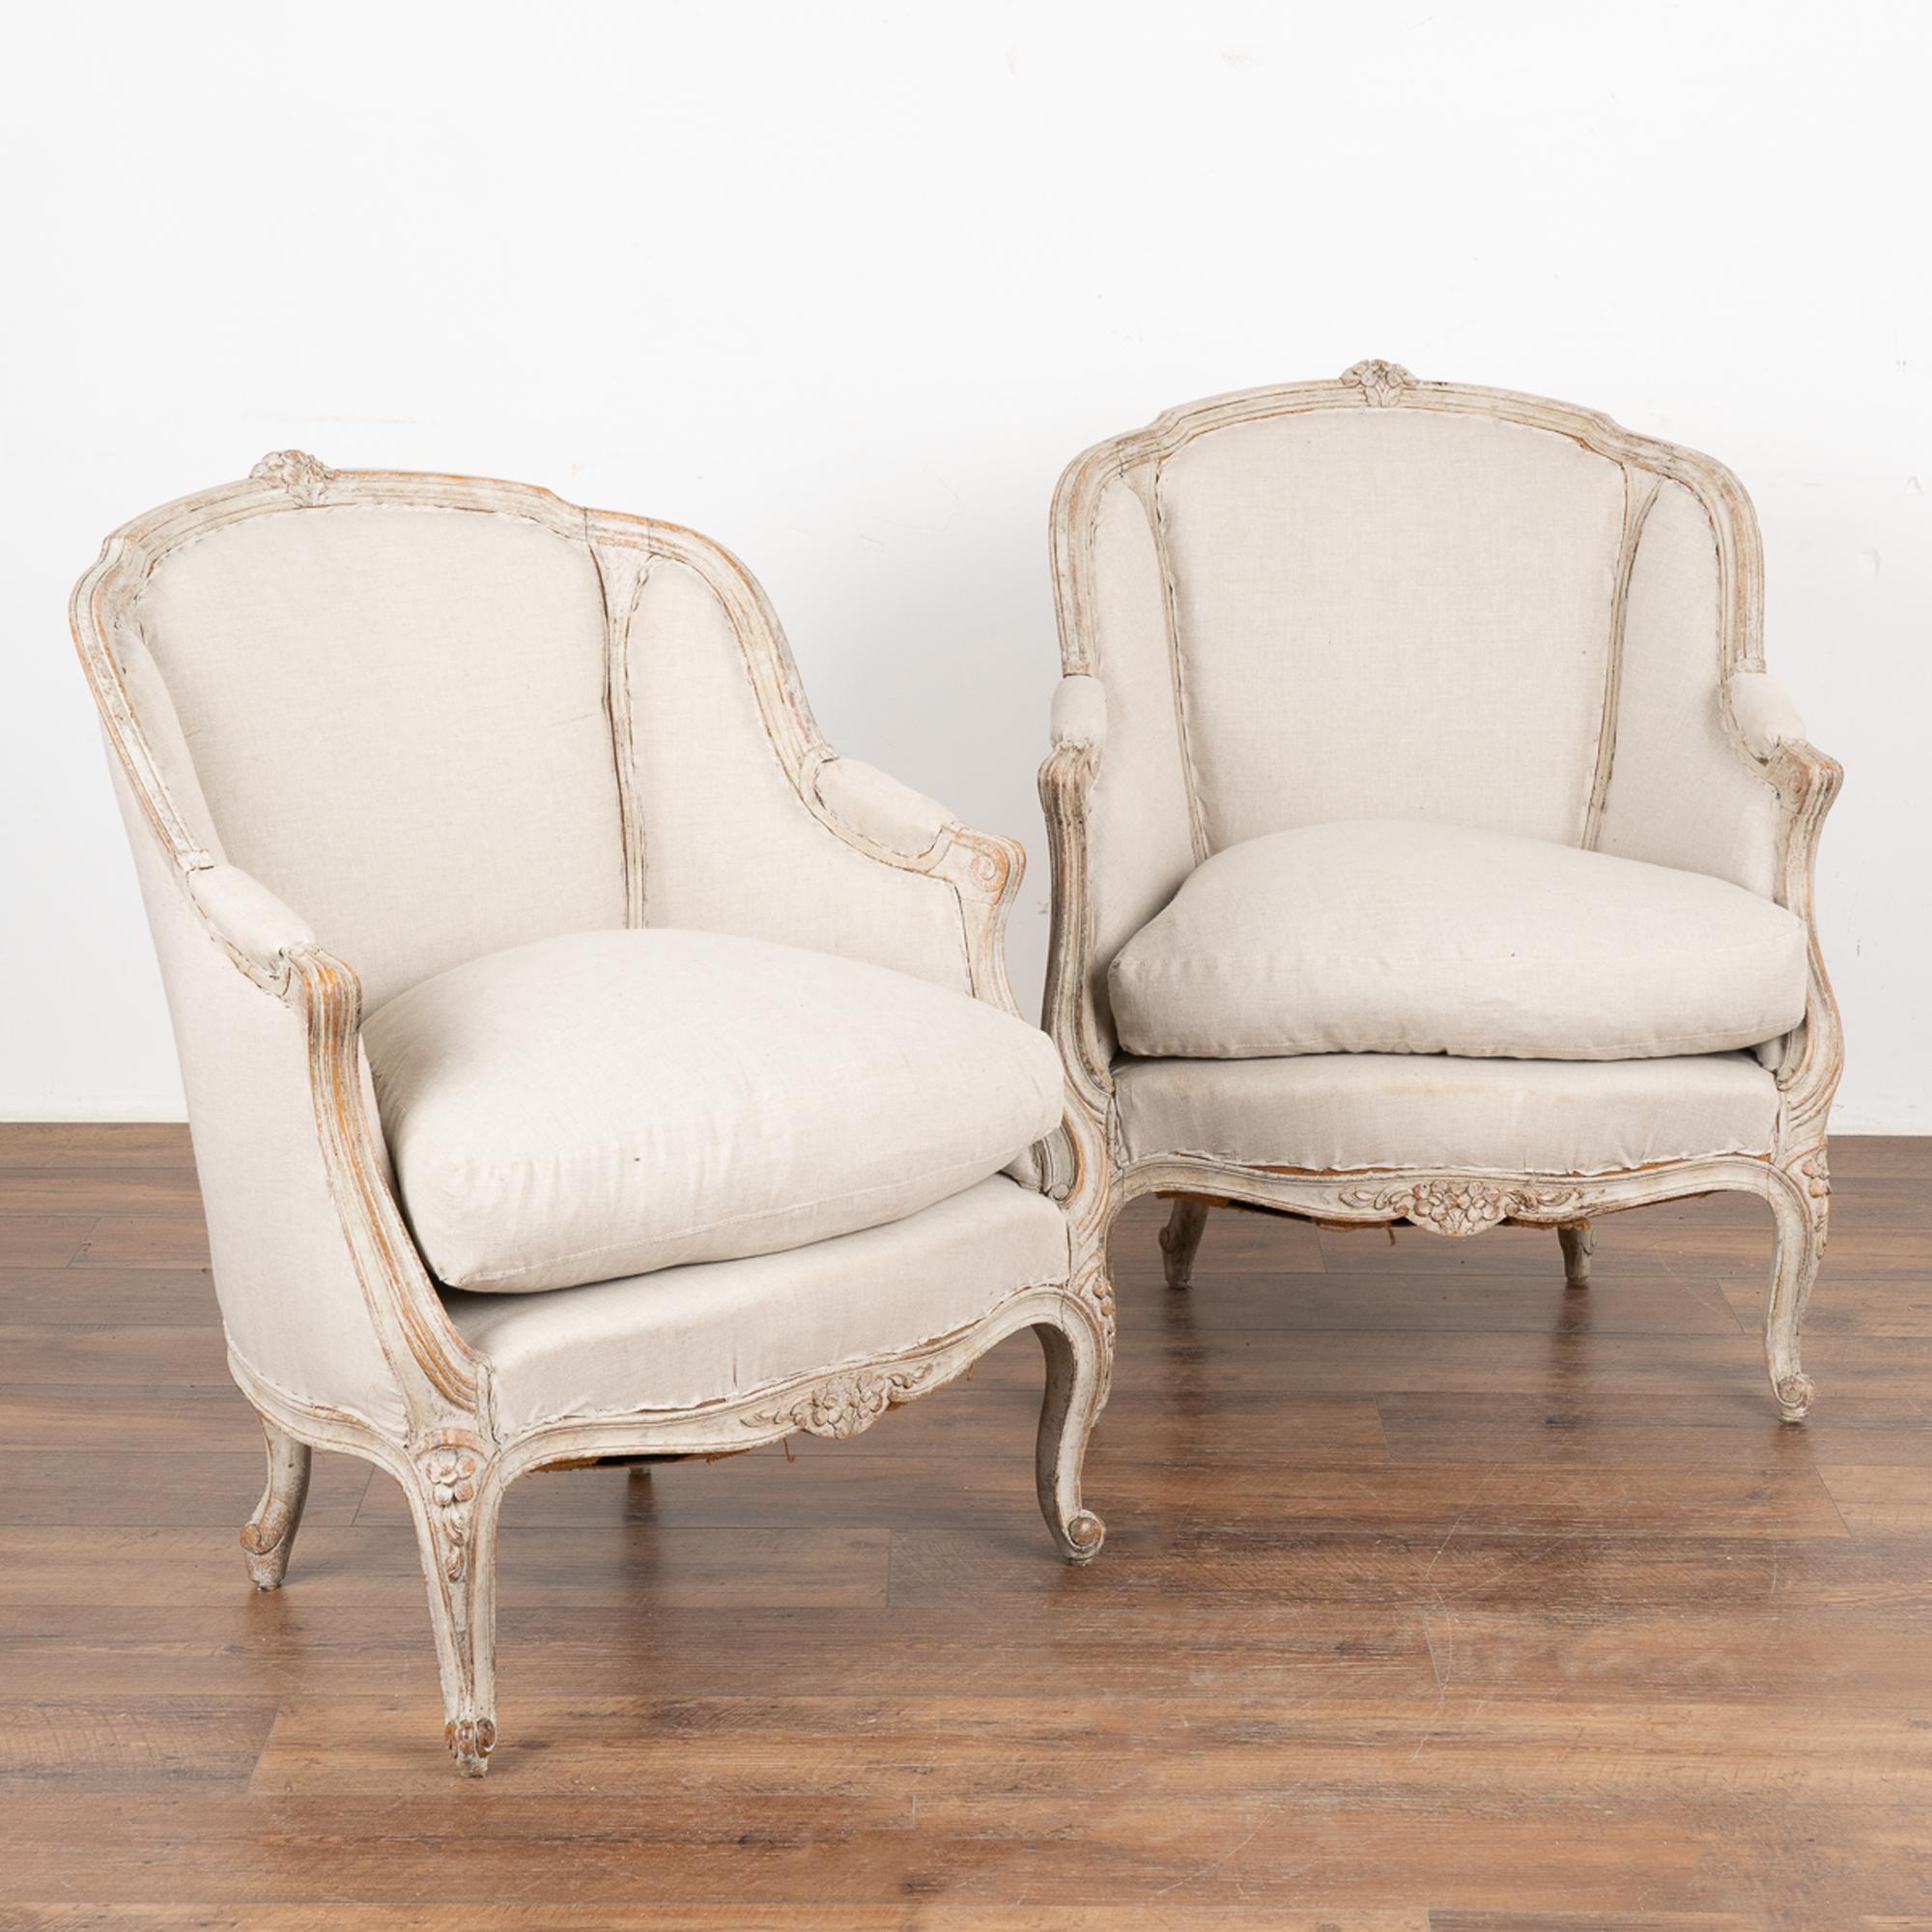 Pair, attractive Swedish country Gustavian white painted barrel back arm chairs.
Carved floral details along top and skirt, resting on curved cabriolet feet which combine to create the romantic appeal of this pair. 
The white painted finish is